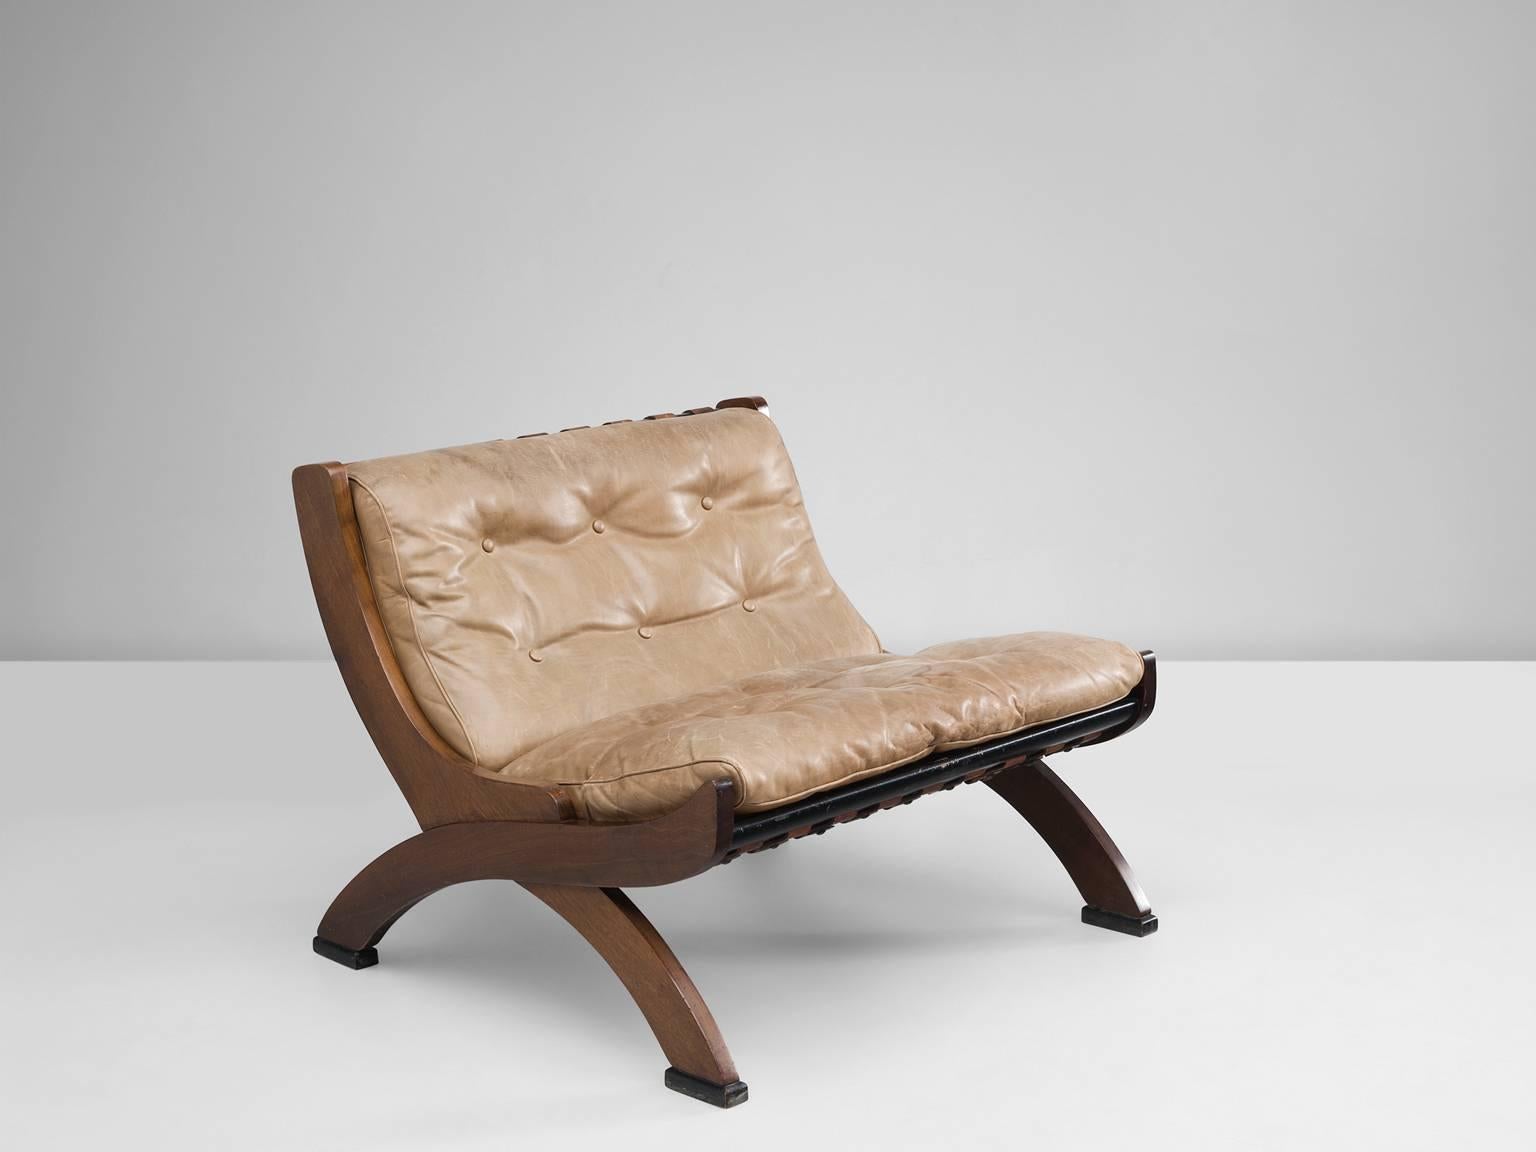 Lounge chair, in walnut and leather, by M. Comolli for I.C.F. De Padova, Italy, 1960s. 

This great lounge chair has a beautiful all-over patina. Highly comfortable due to down filling and well-designed proportions. The back shows nice cognac